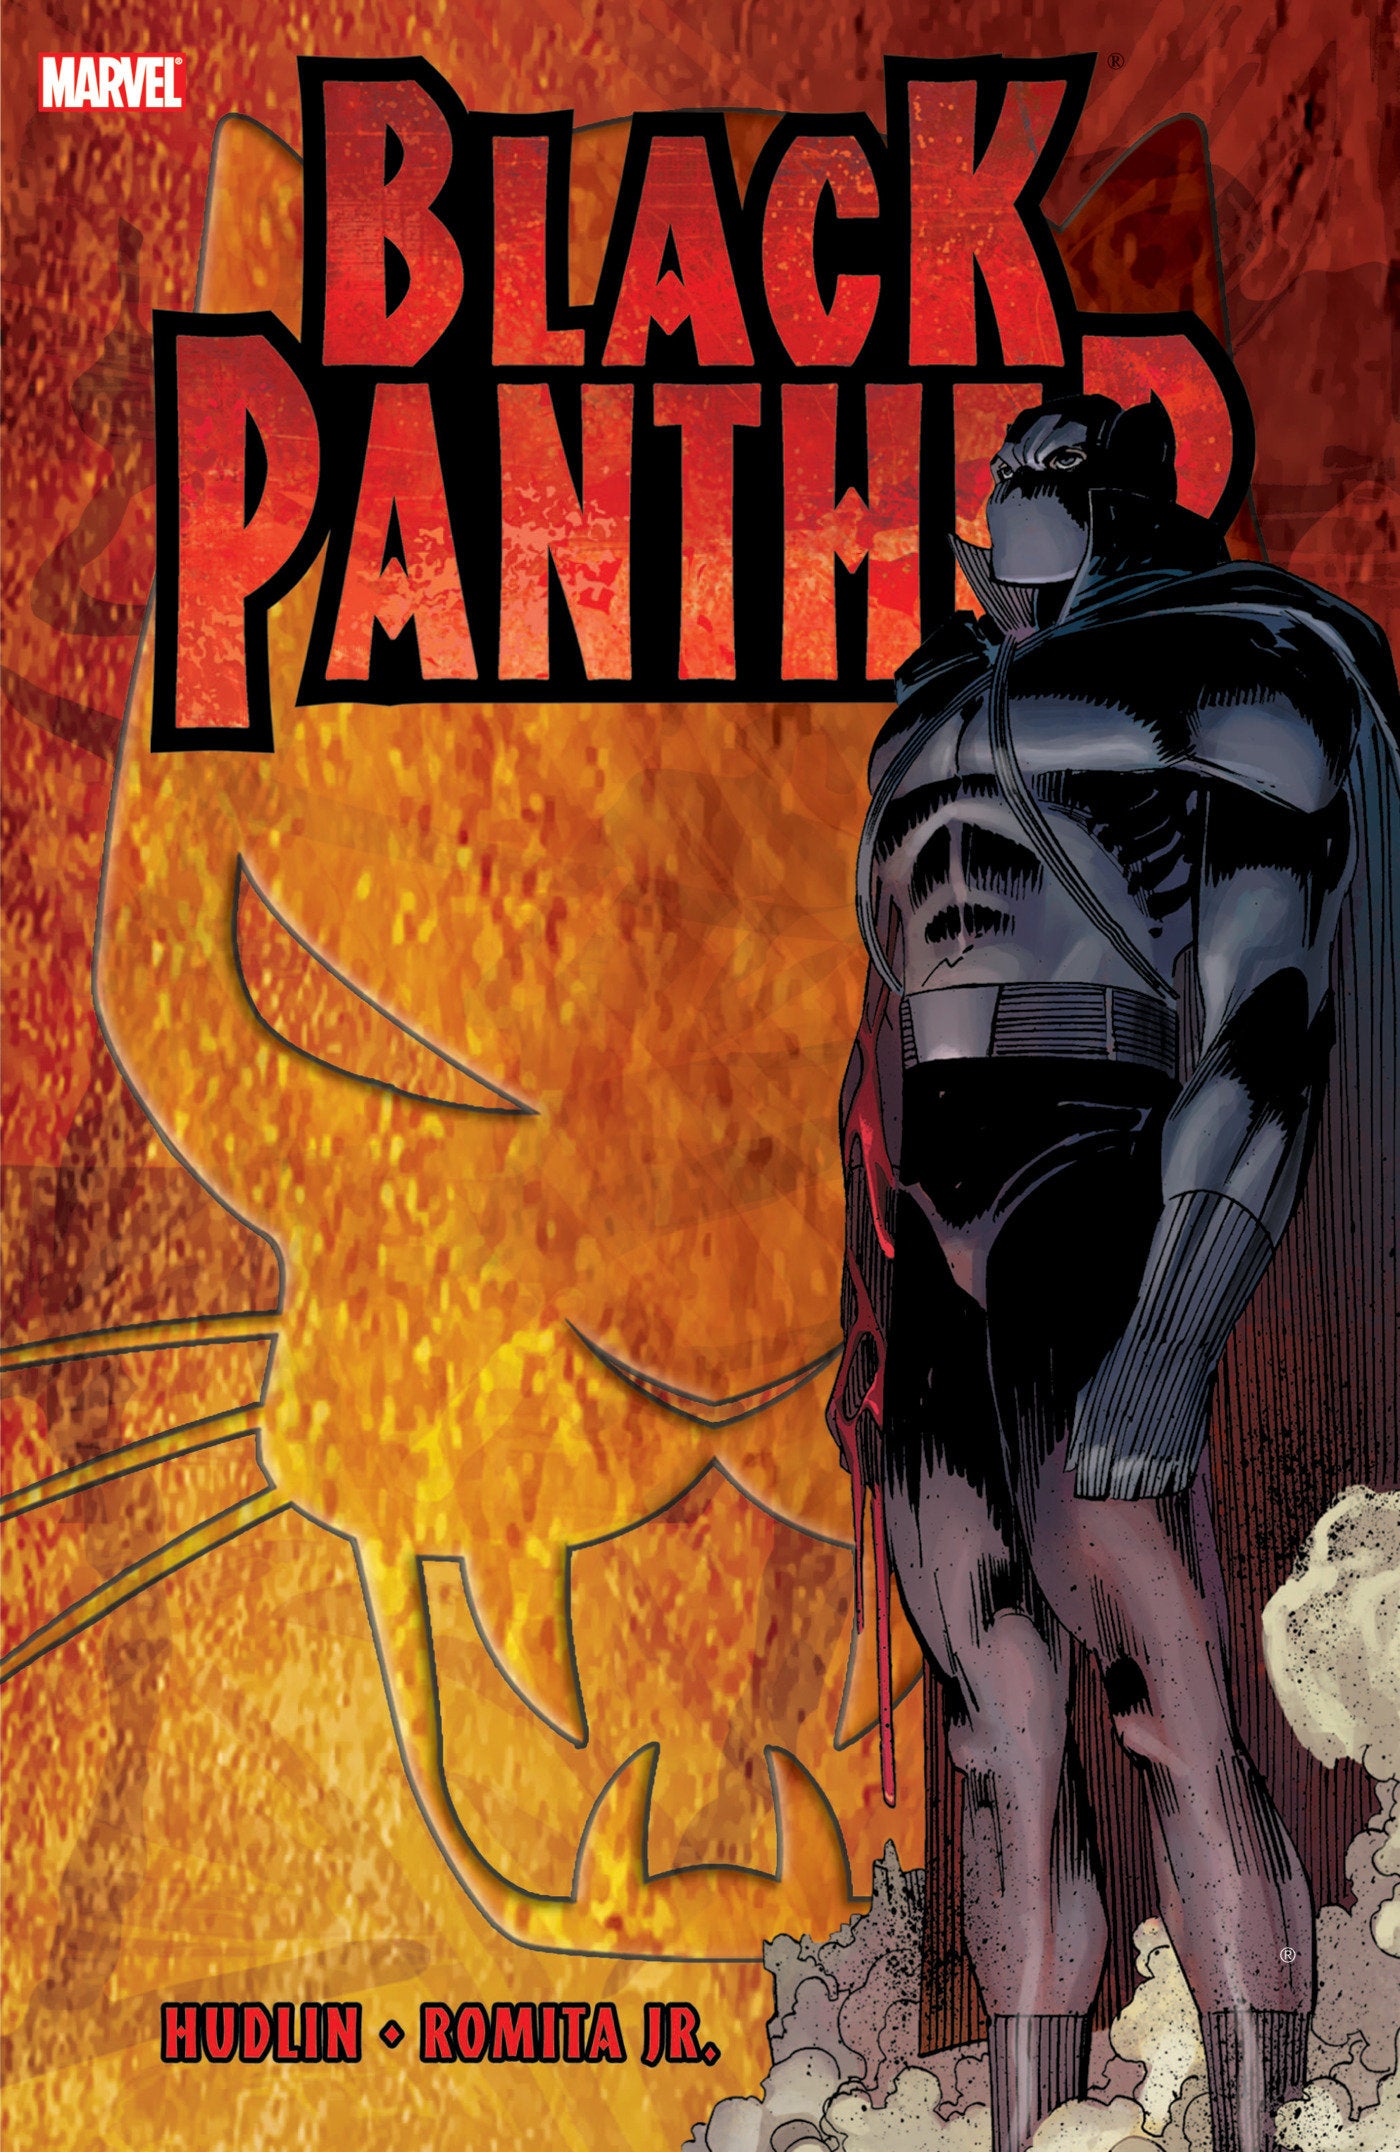 BLACK PANTHER: WHO IS THE BLACK PANTHER TRADE PAPERBACK